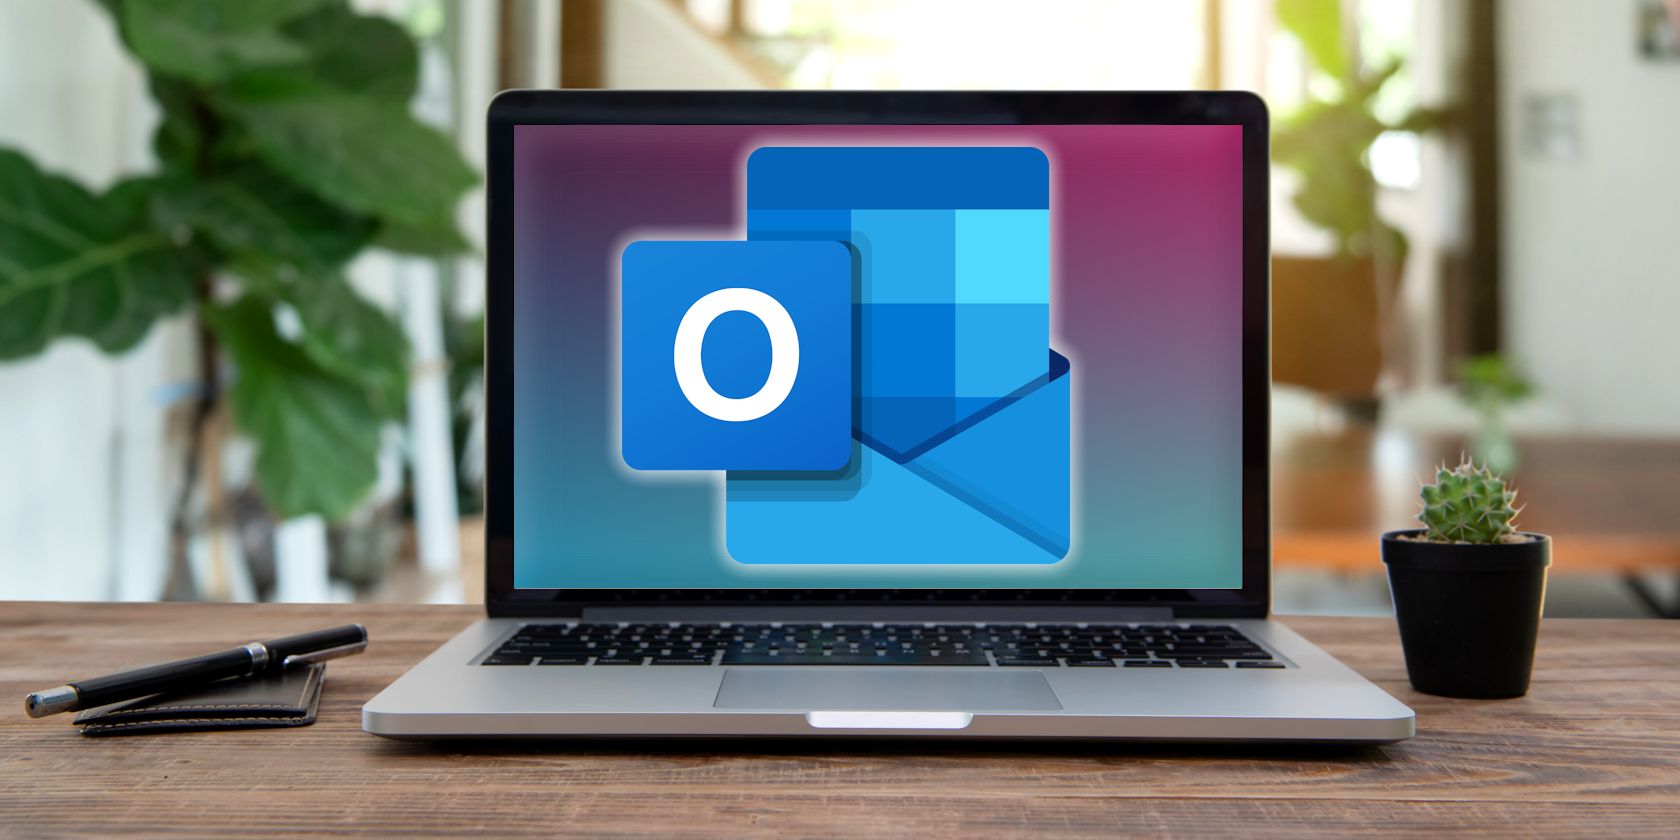 You Can Now Voice Dictate Emails in Microsoft Outlook, but Should You?